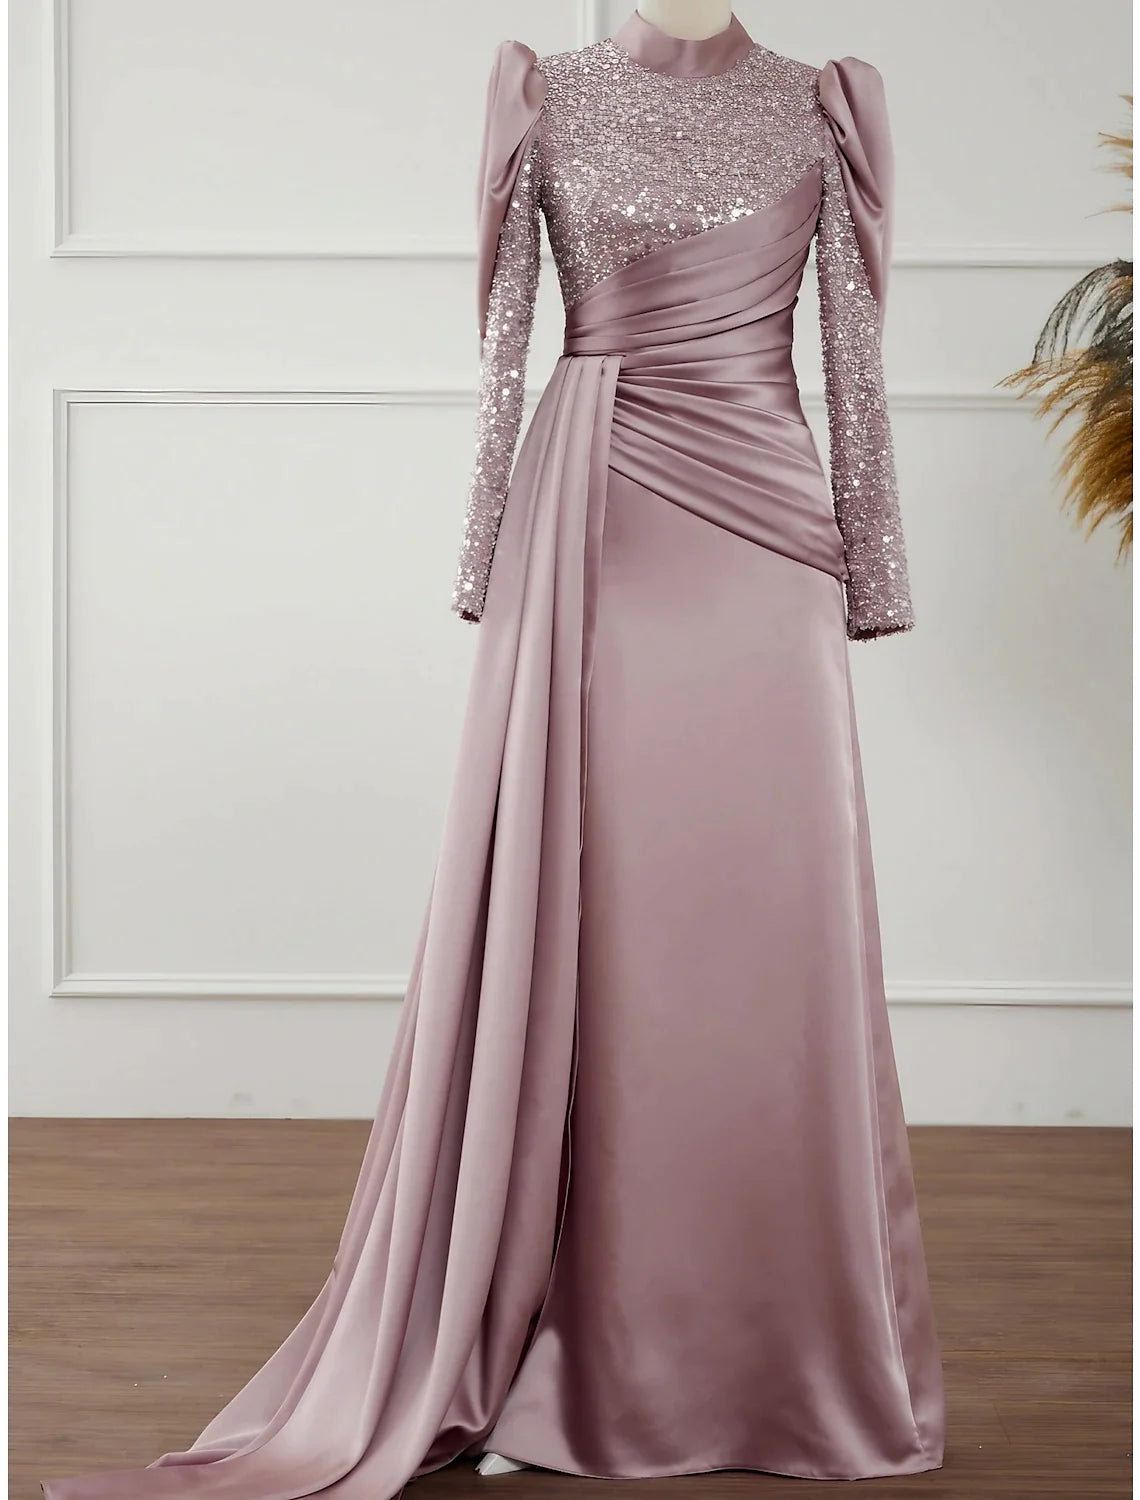 A-Line Evening Gown Elegant Dress Formal Sweep / Brush Train Long Sleeve Jewel Neck Satin with Glitter Pleats Ruched